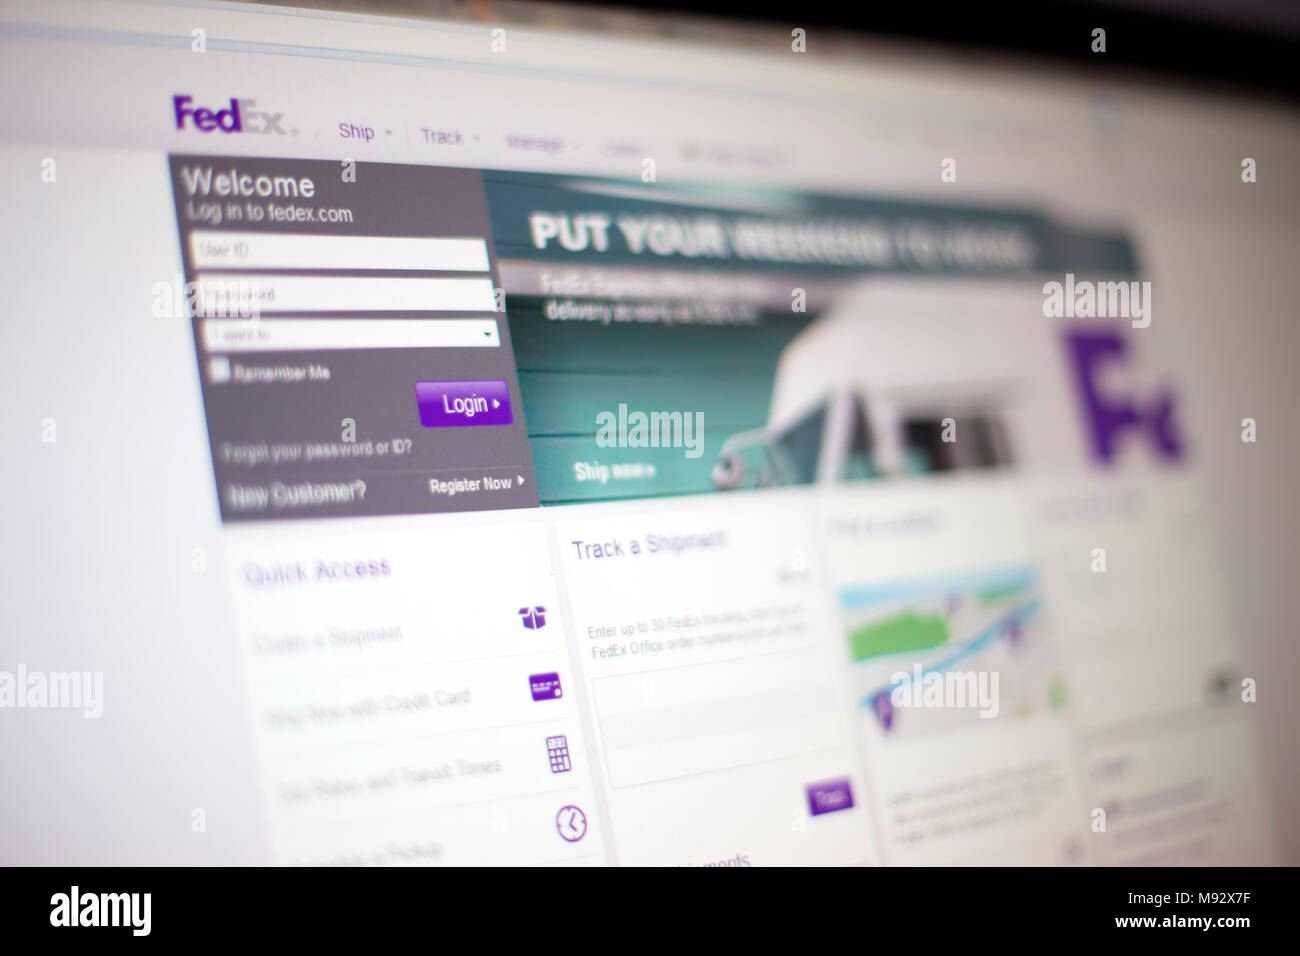 BELGRADE, SERBIA - MAY 27, 2014: View at computer screen with FedEx site. FedEx Corporation is an American multinational courier delivery services com Stock Photo